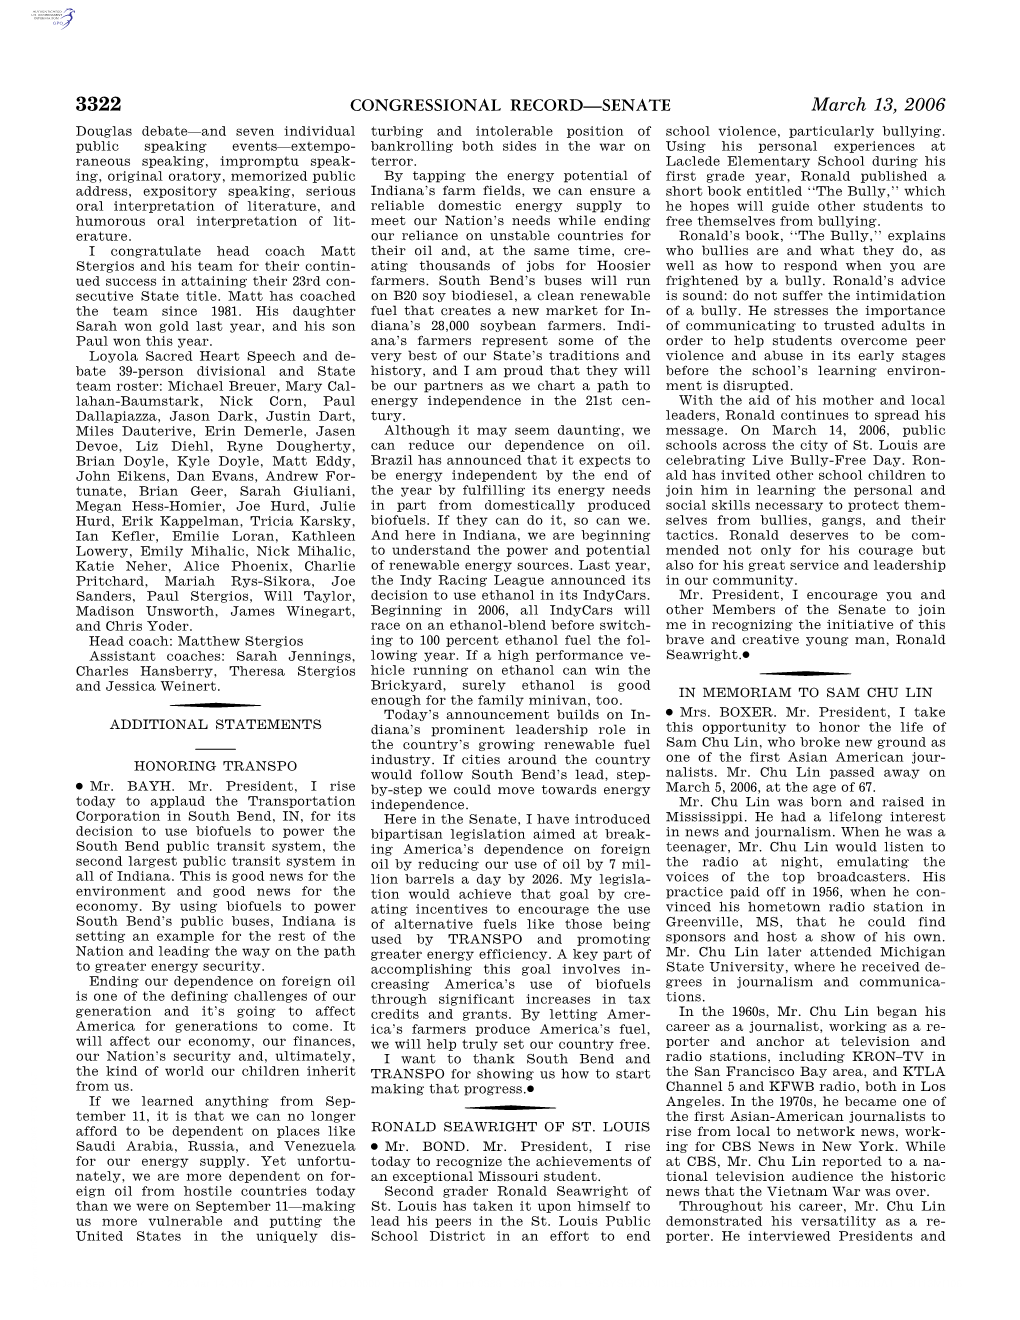 CONGRESSIONAL RECORD—SENATE March 13, 2006 Douglas Debate—And Seven Individual Turbing and Intolerable Position of School Violence, Particularly Bullying